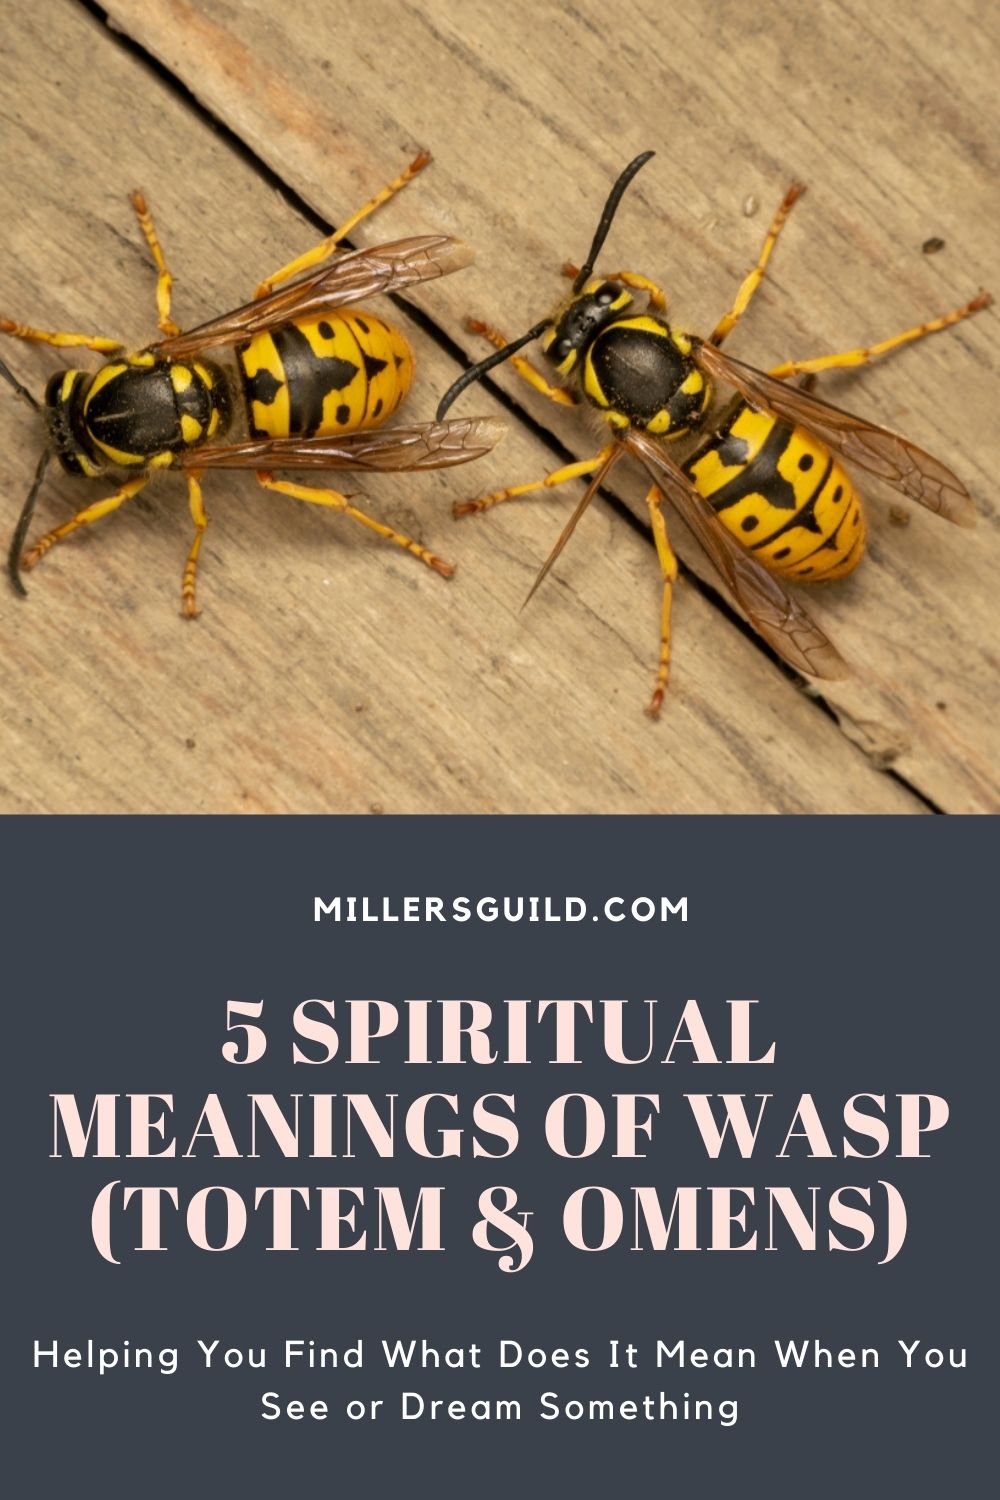 5 Spiritual Meanings of Wasp (Totem & Omens) 2